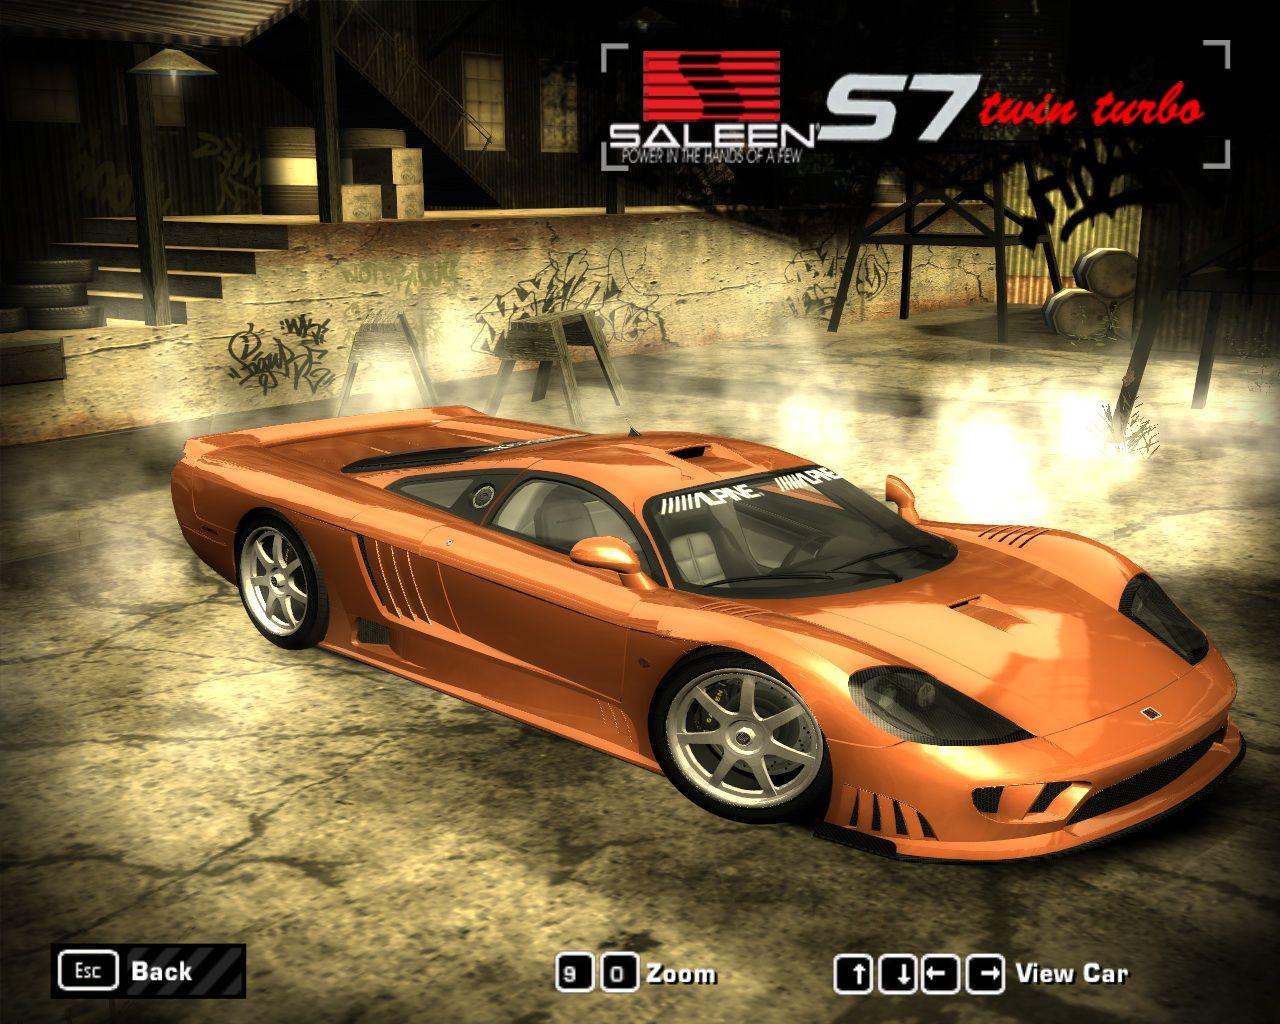 Saleen S7 Logo - Need For Speed Most Wanted Saleen S7 Twin Turbo (Juiced 2)